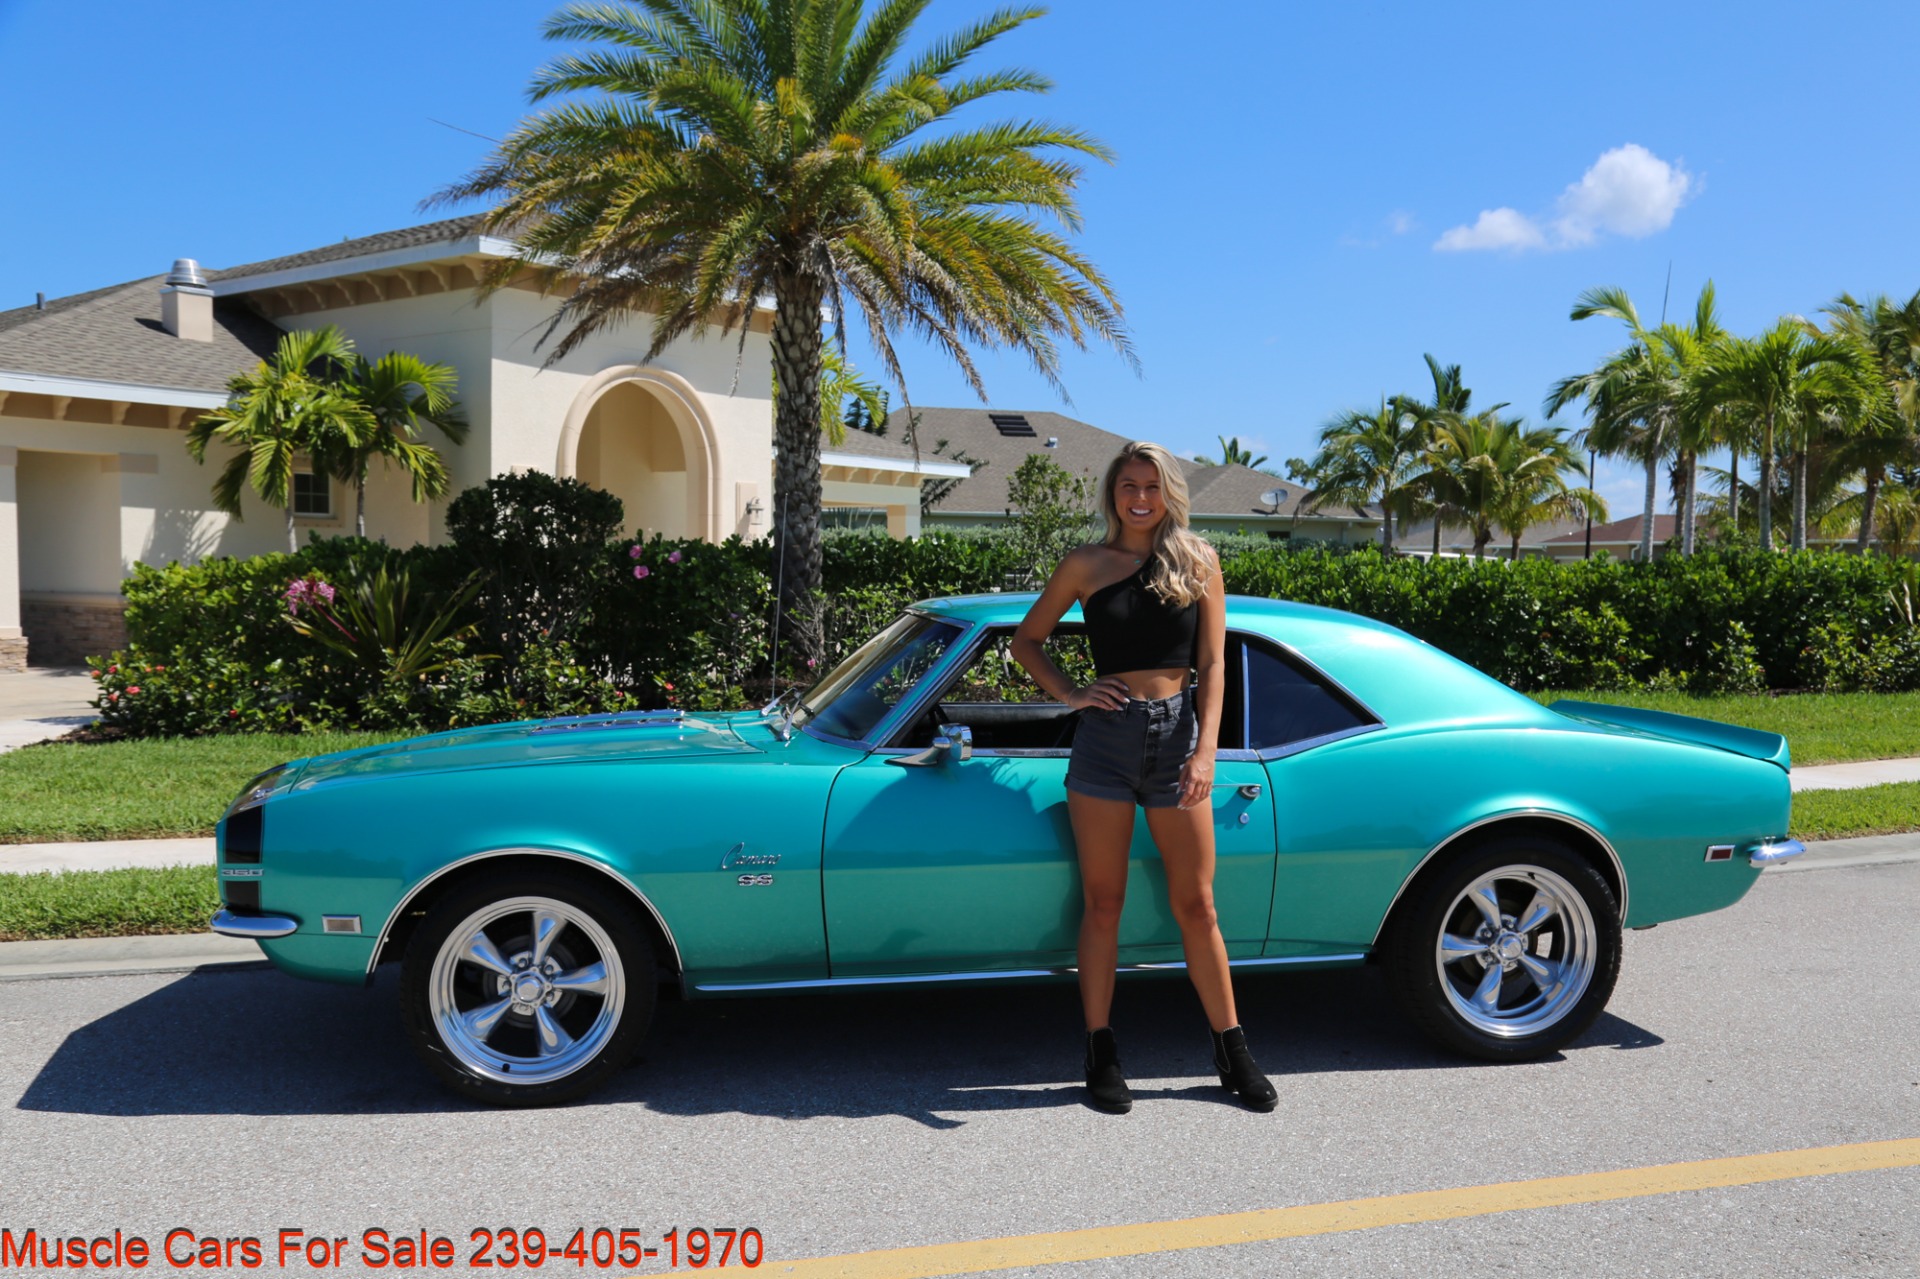 Used 1968 Chevrolet Camaro SS For Sale ($39,500) | Muscle Cars for Sale